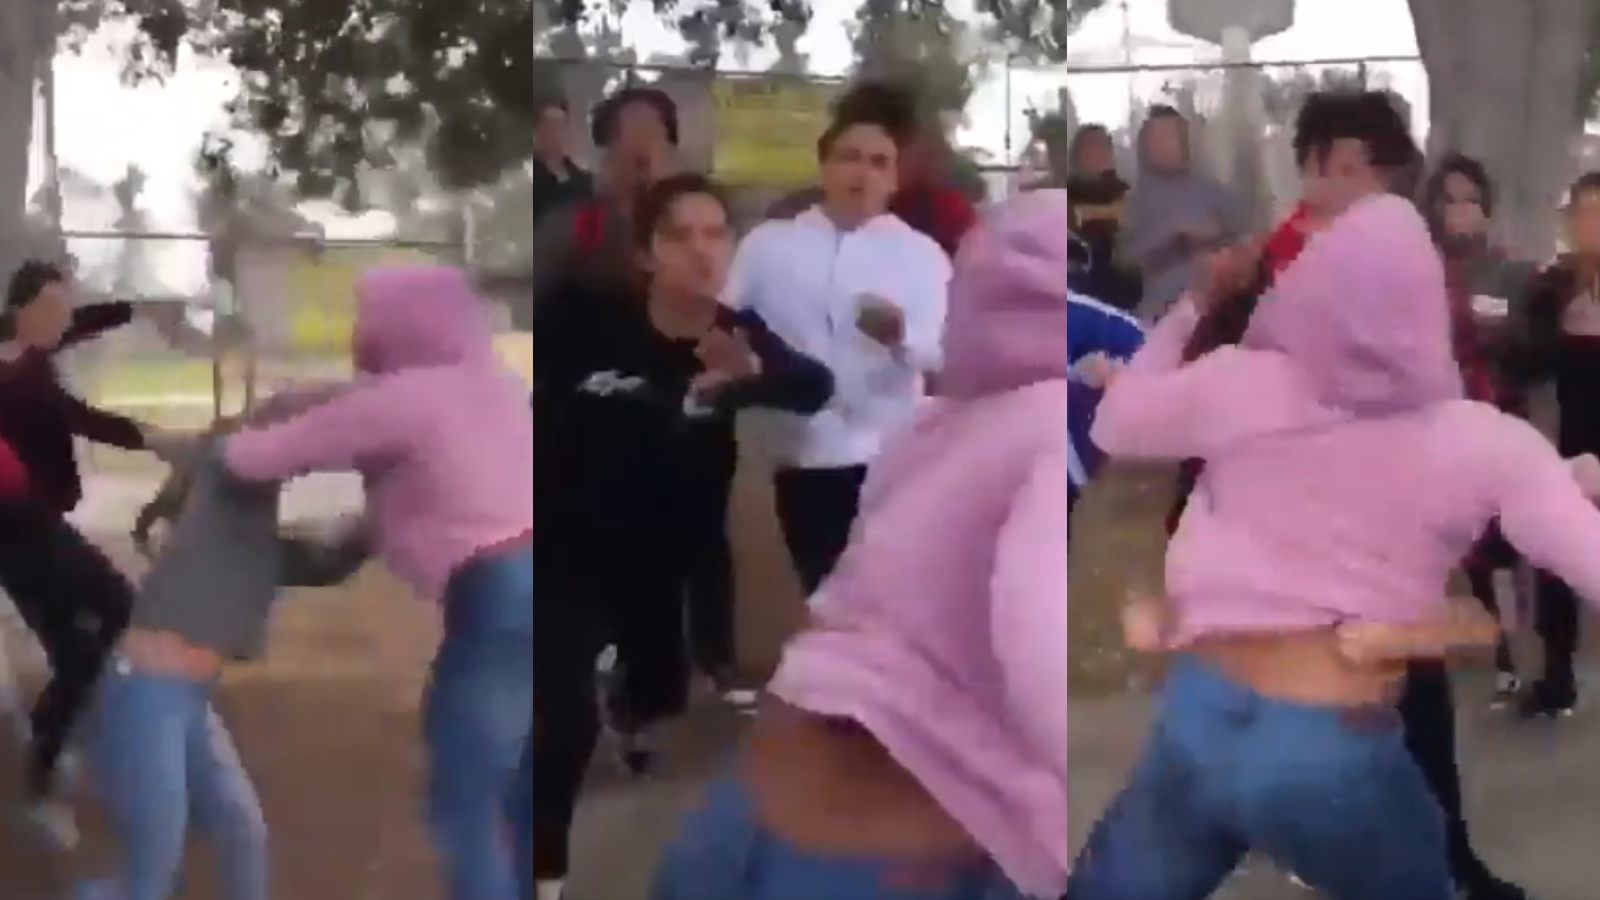 albert lebron recommends youtube ghetto girl fights pic